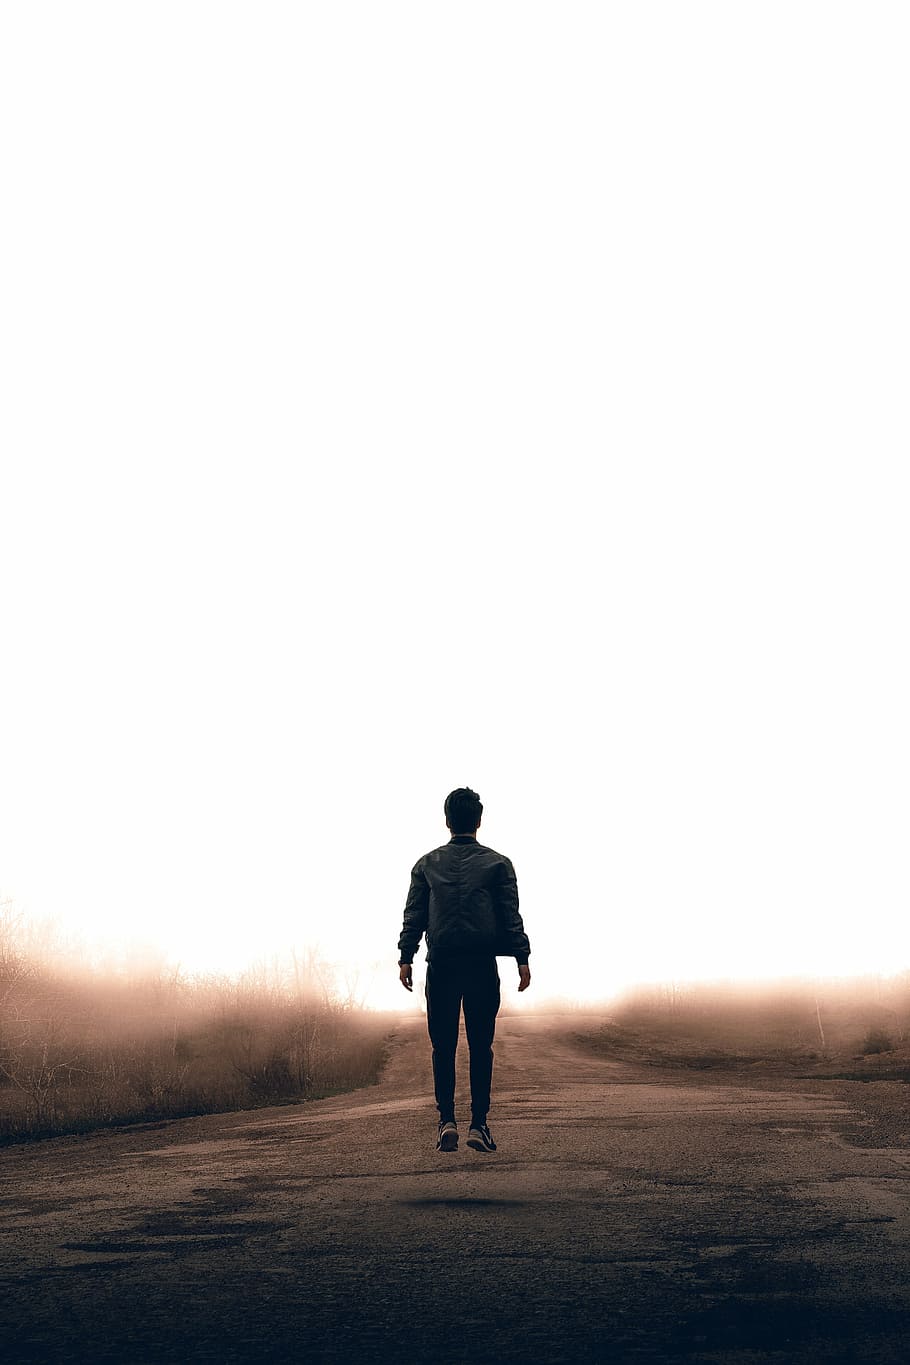 HD wallpaper Photography of Person Walking On Road 4k wallpaper  afterglow  Wallpaper Flare